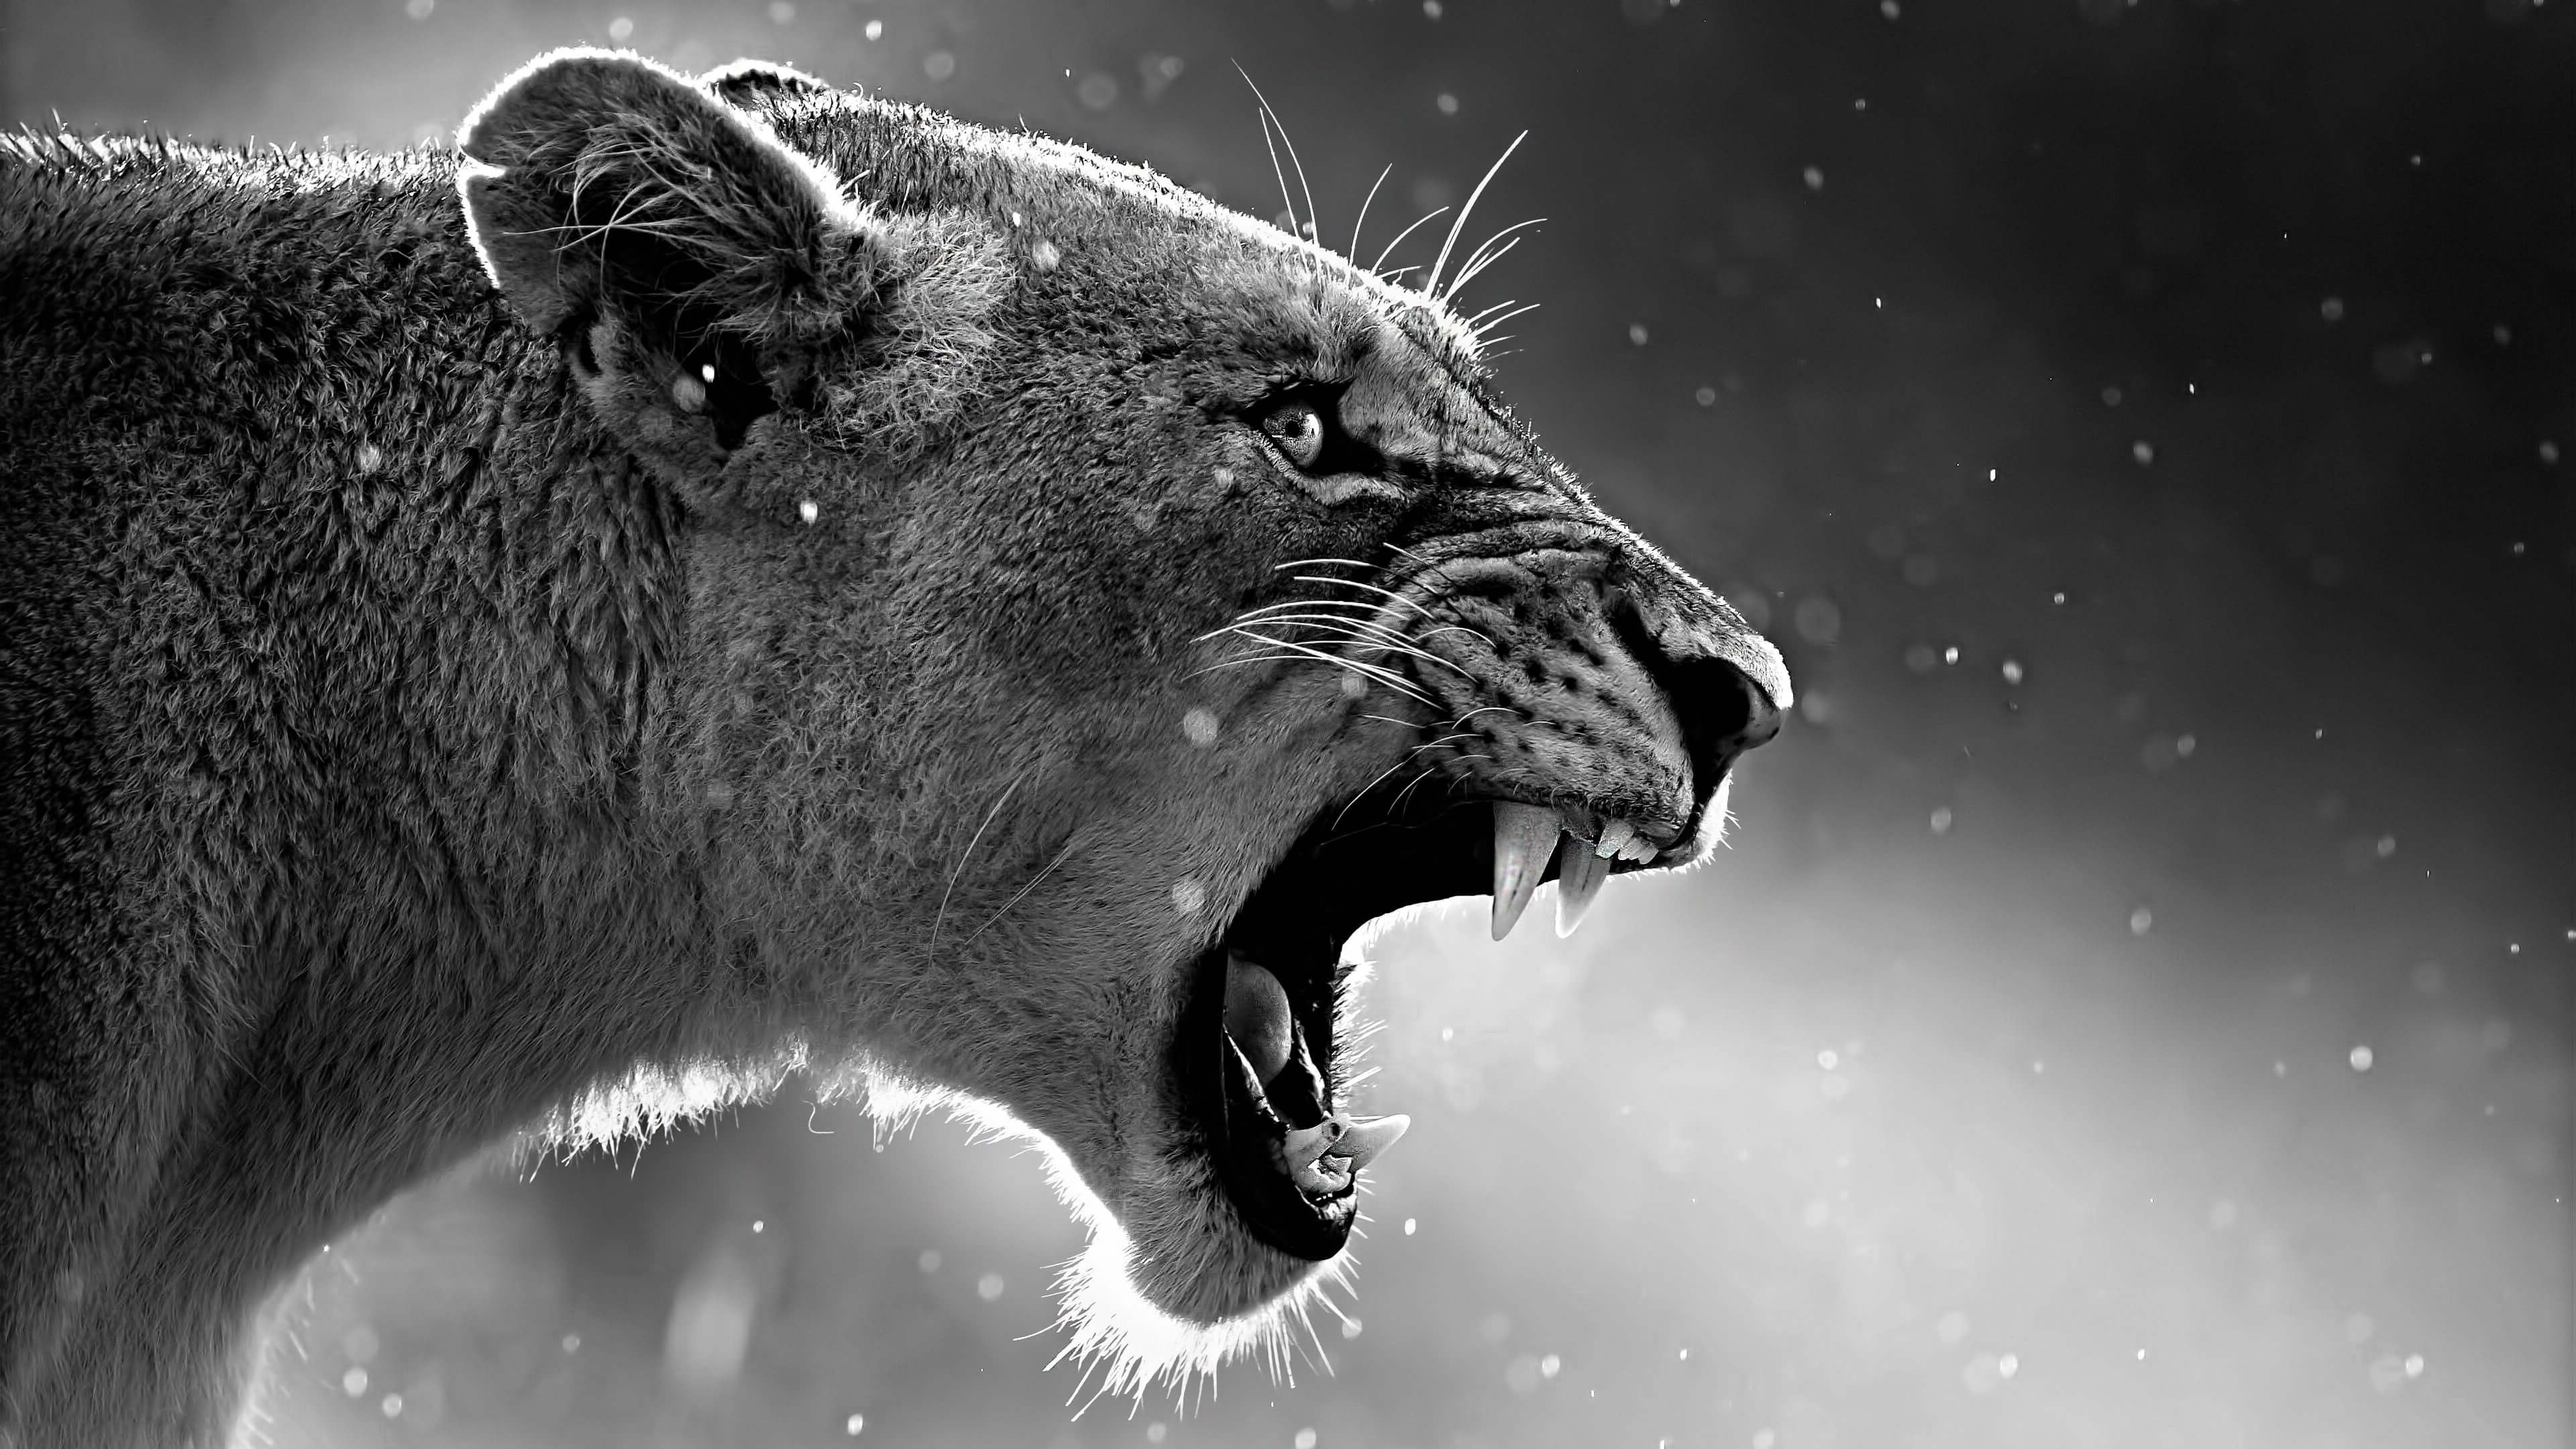 Lion Wallpaper Black and White (50+ images)